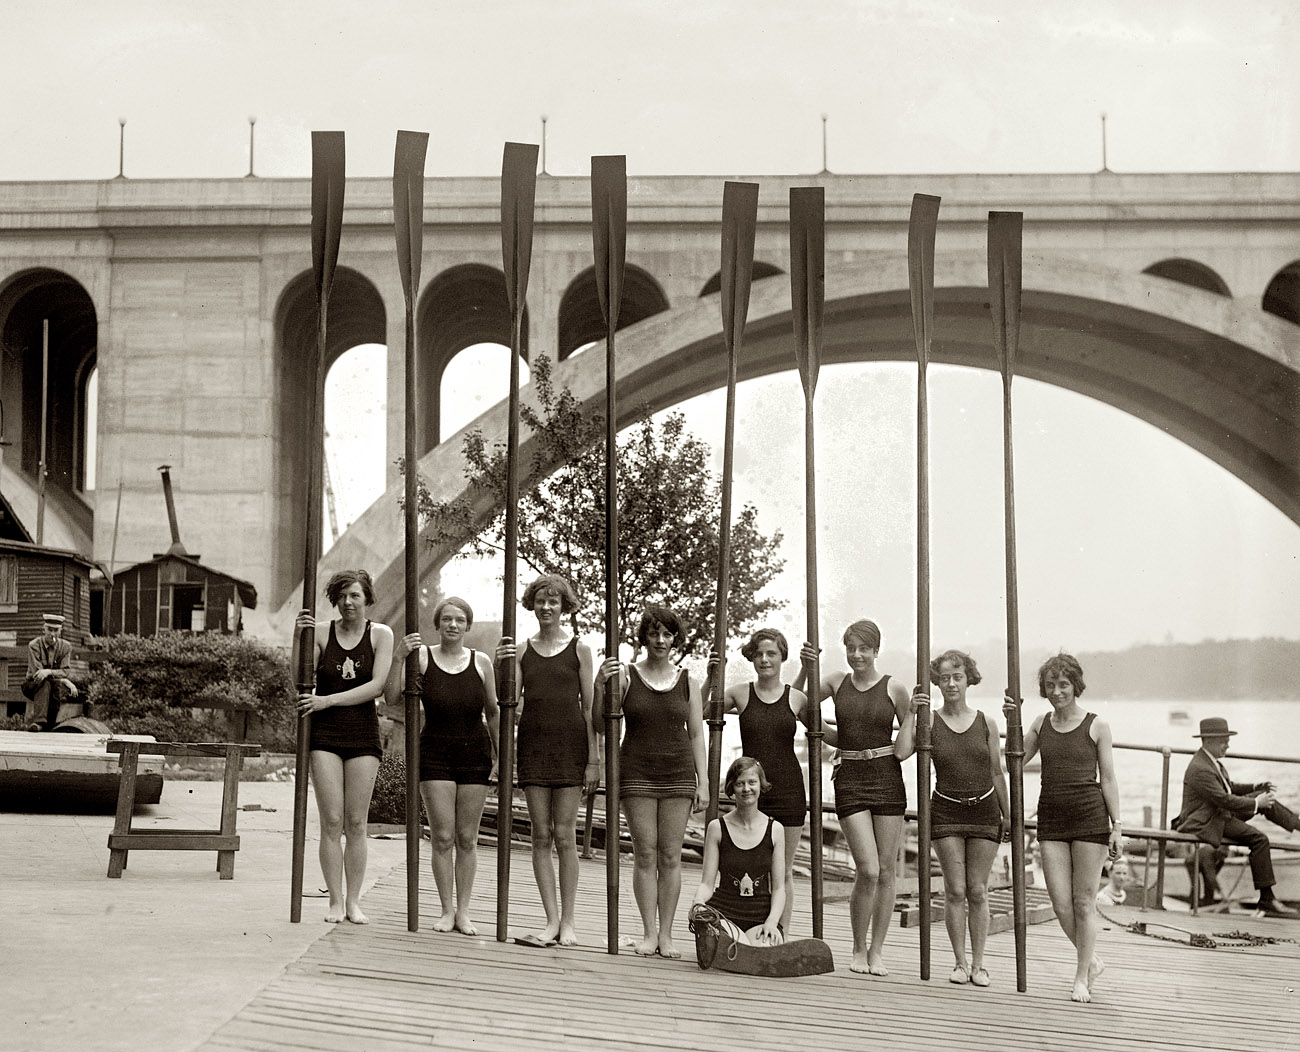 May 1, 1926. Eight-oar shell crew of Capital Athletic Club against a backdrop of the Key Bridge over the Potomac. View full size. National Photo Company.